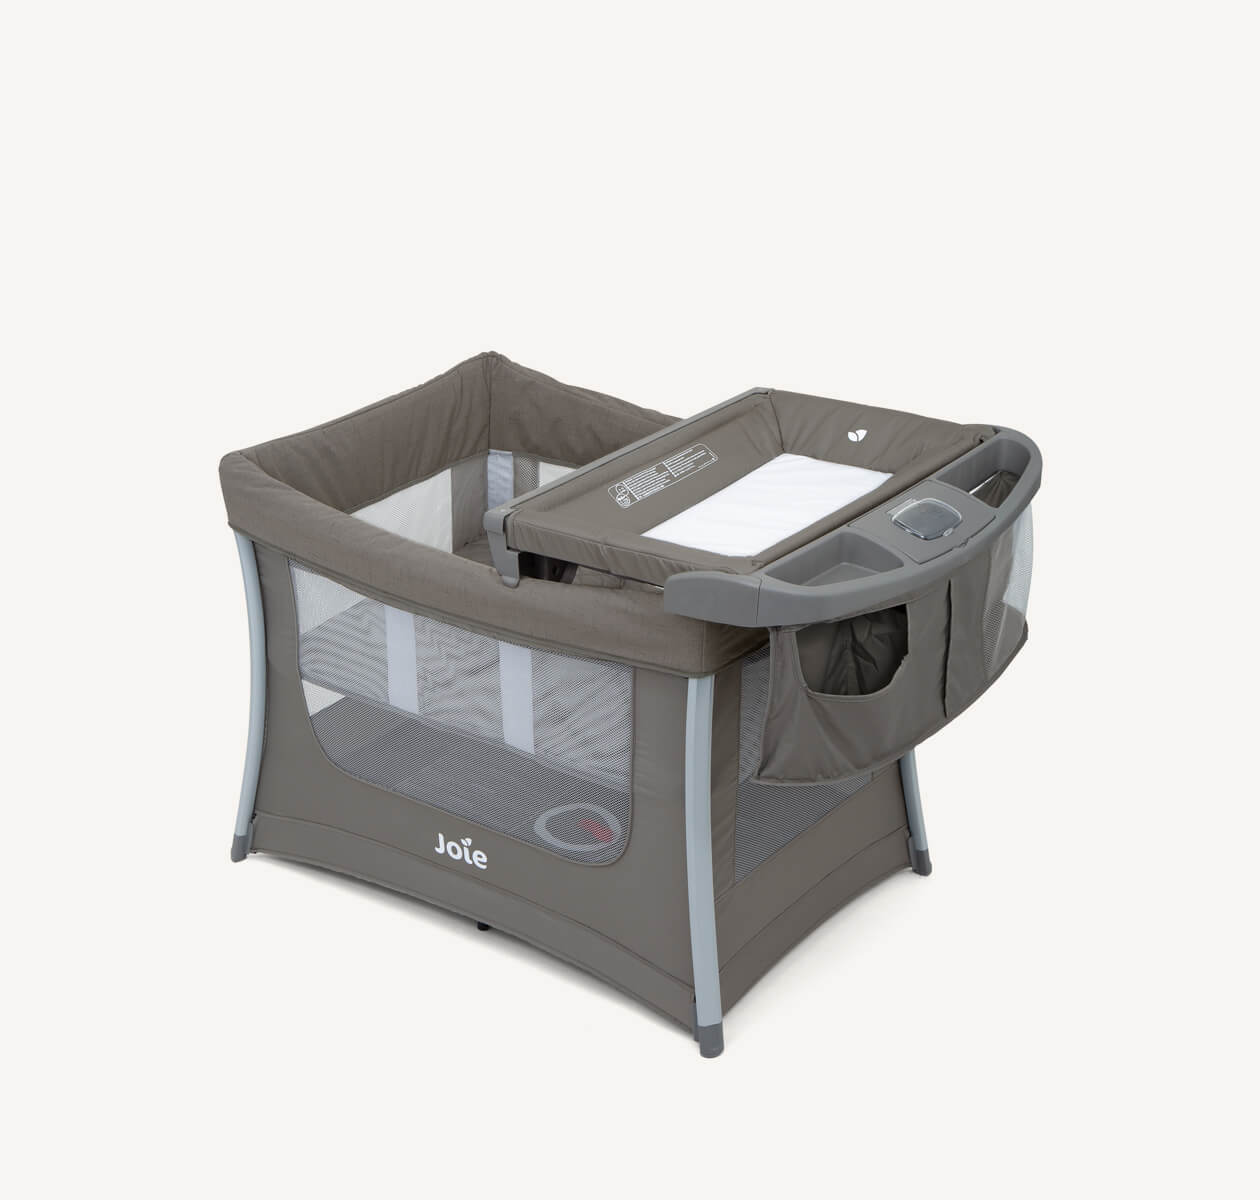 The Joie travel cot illusion with bassinet insert and changing table with storage on top in dark gray from a left angle. 